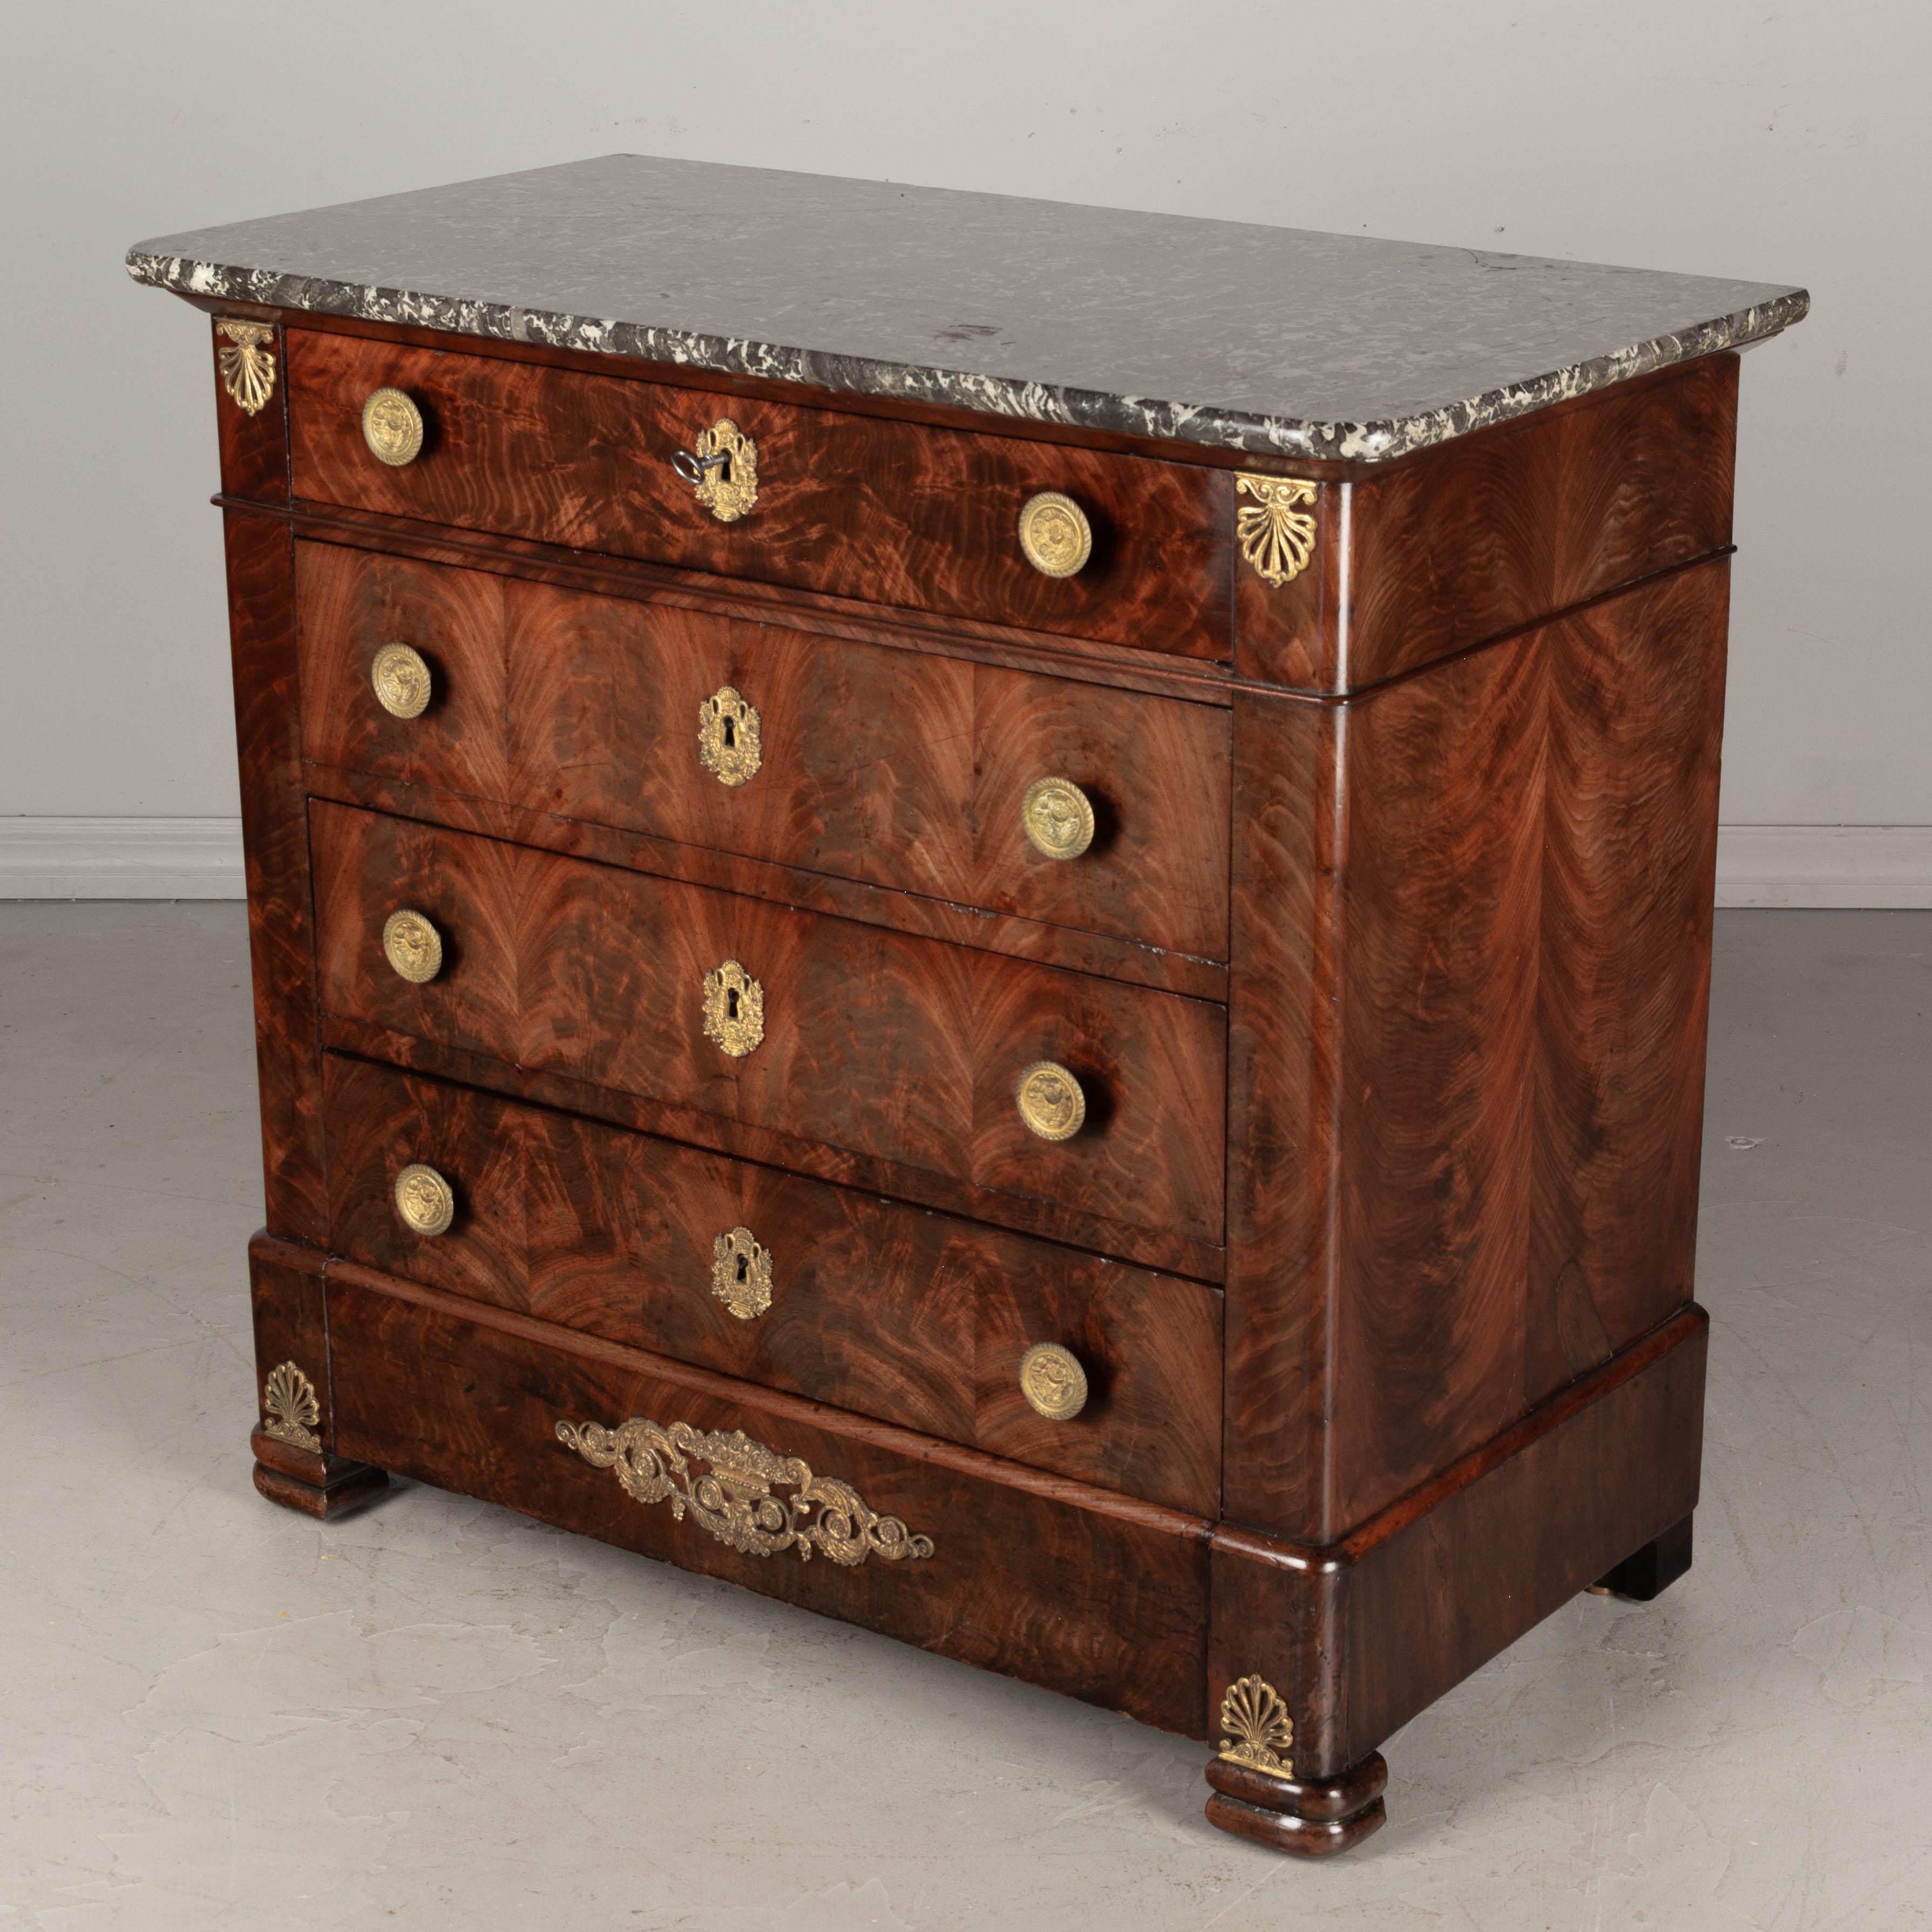 An early 19th century French Louis Philippe Period mahogany four-drawer commode, or chest of drawers. Fine craftsmanship with book-matched flame mahogany veneer and retaining a nice finish. Oak as a secondary wood. The drawers slide easily and the